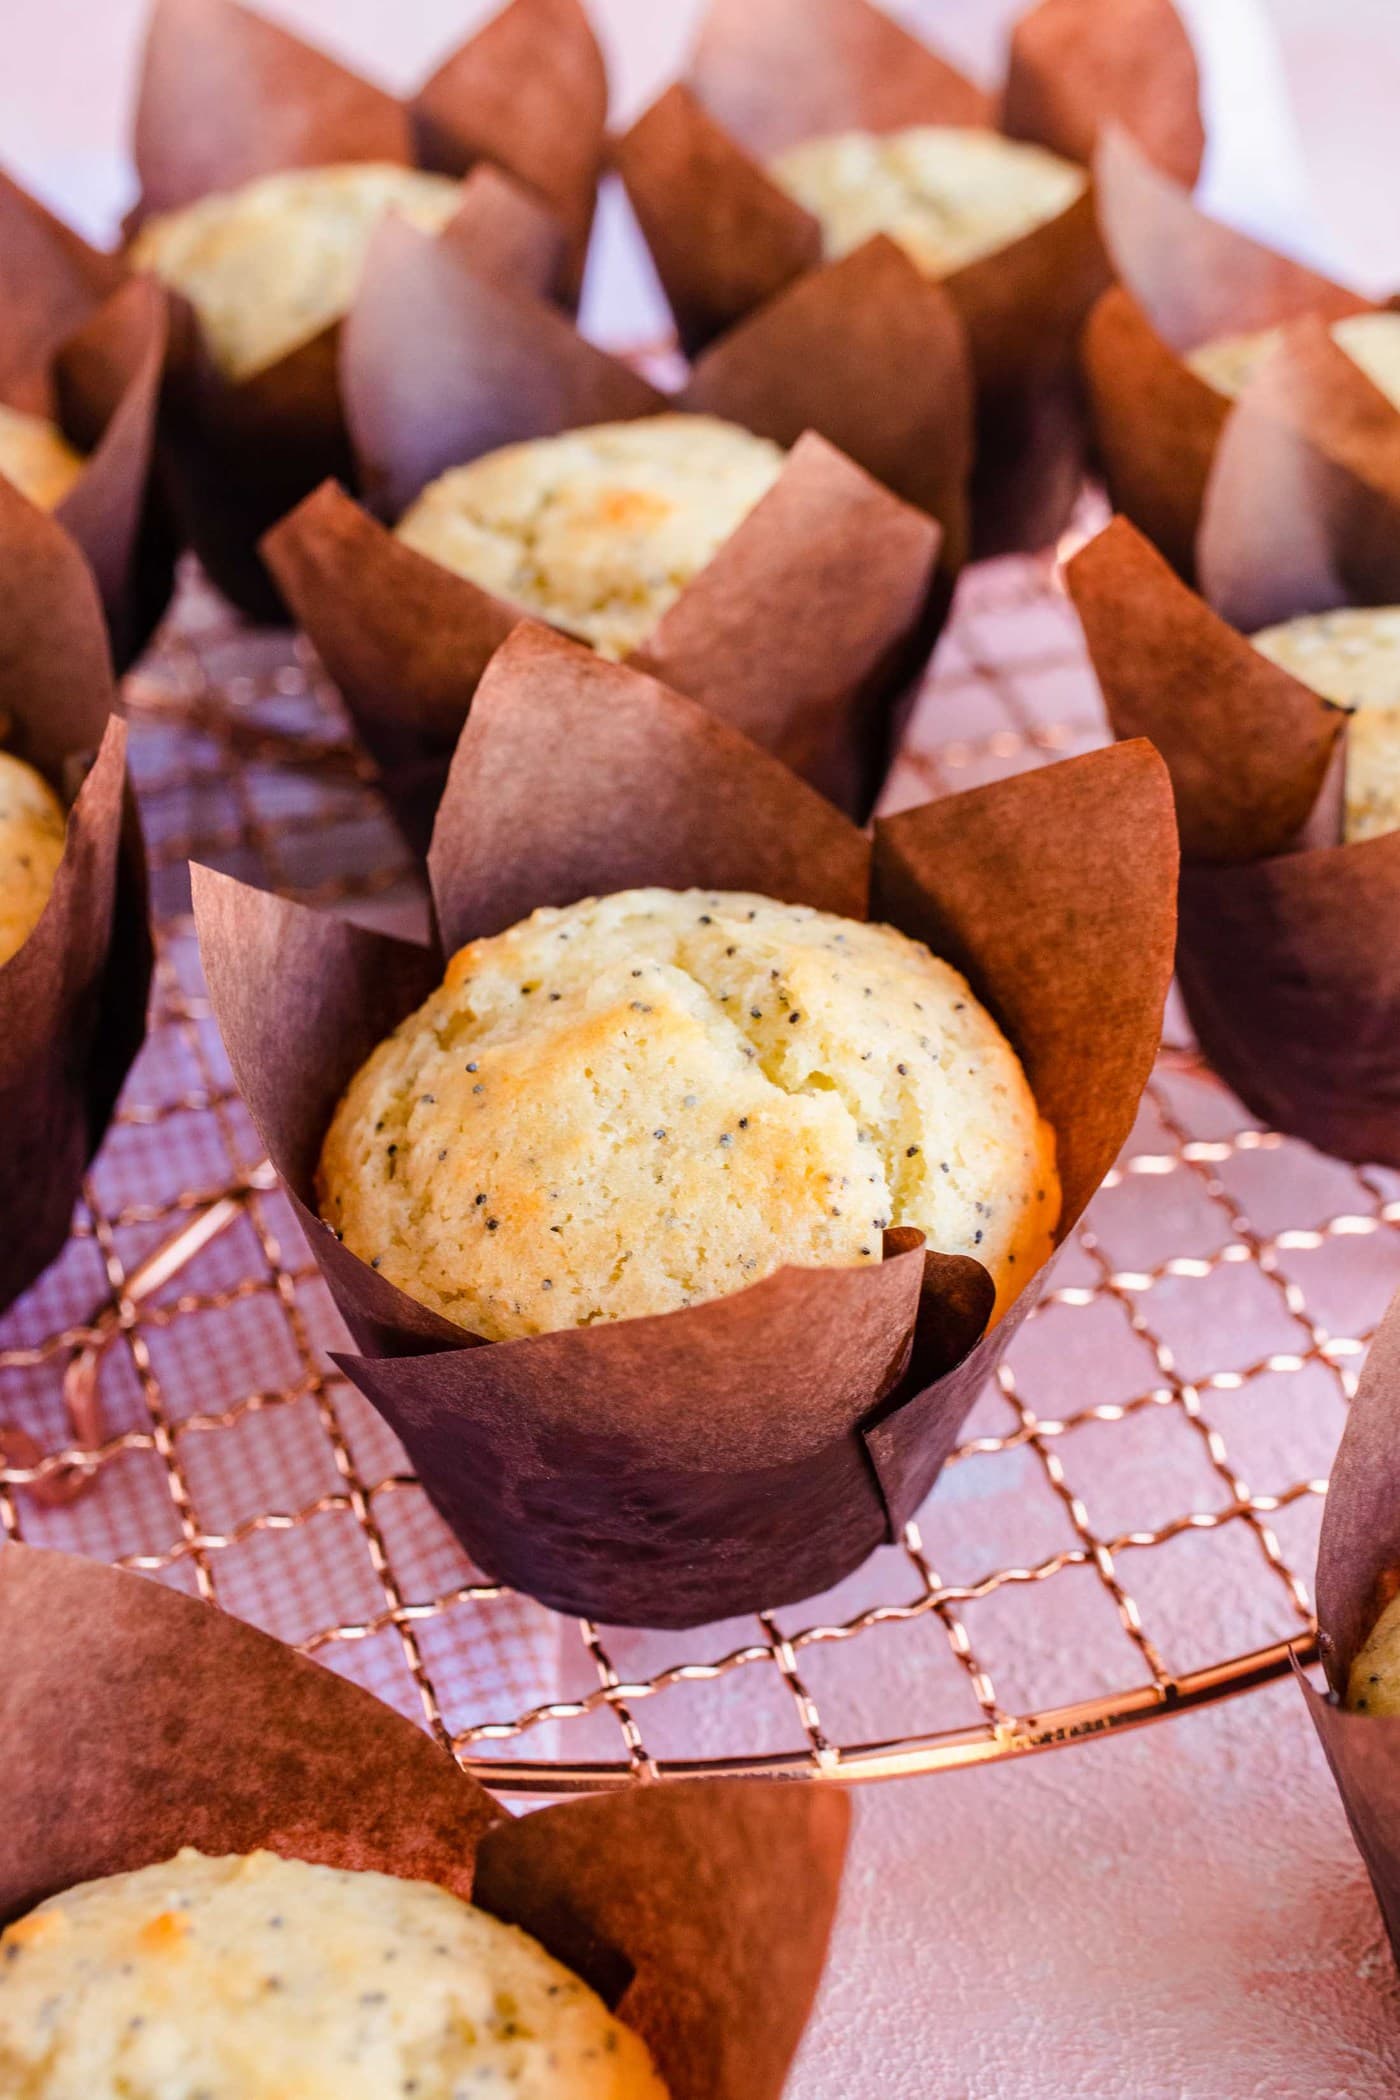 Breakfast Poppyseed Muffins Recipe Details by top Houston lifestyle blogger Ashley Rose of Sugar & Cloth